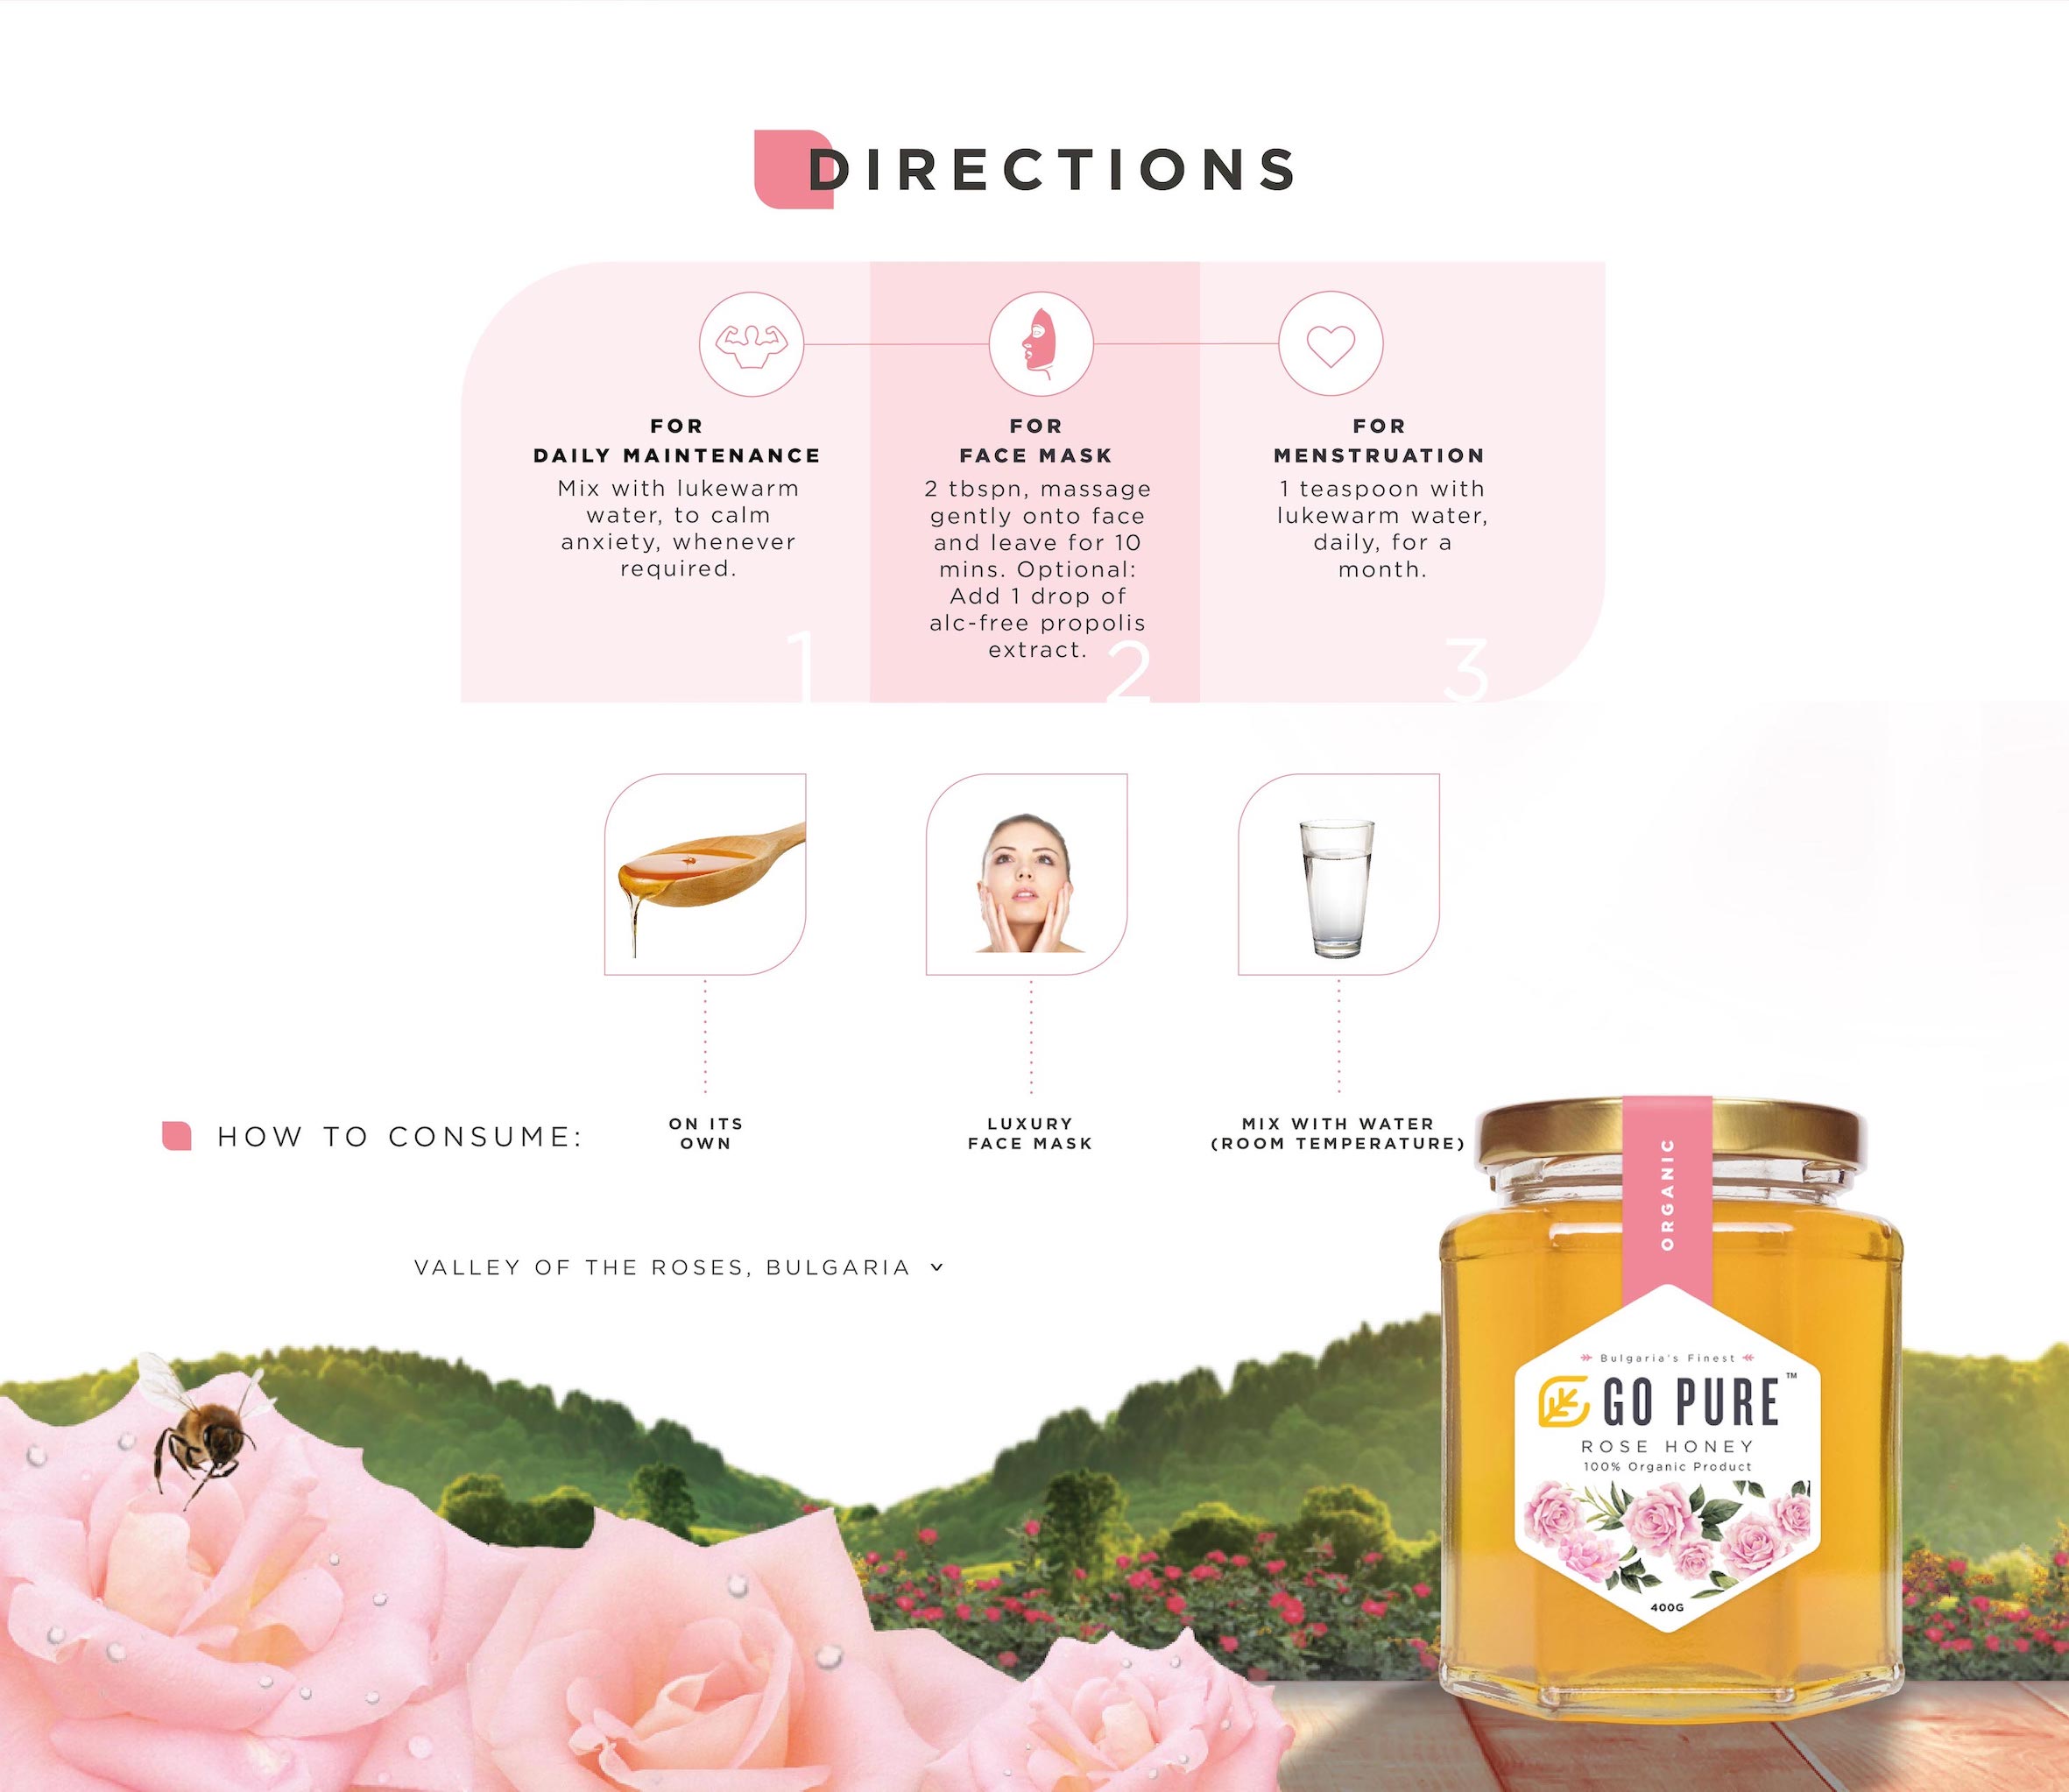 Directions to Consume Rose Honey